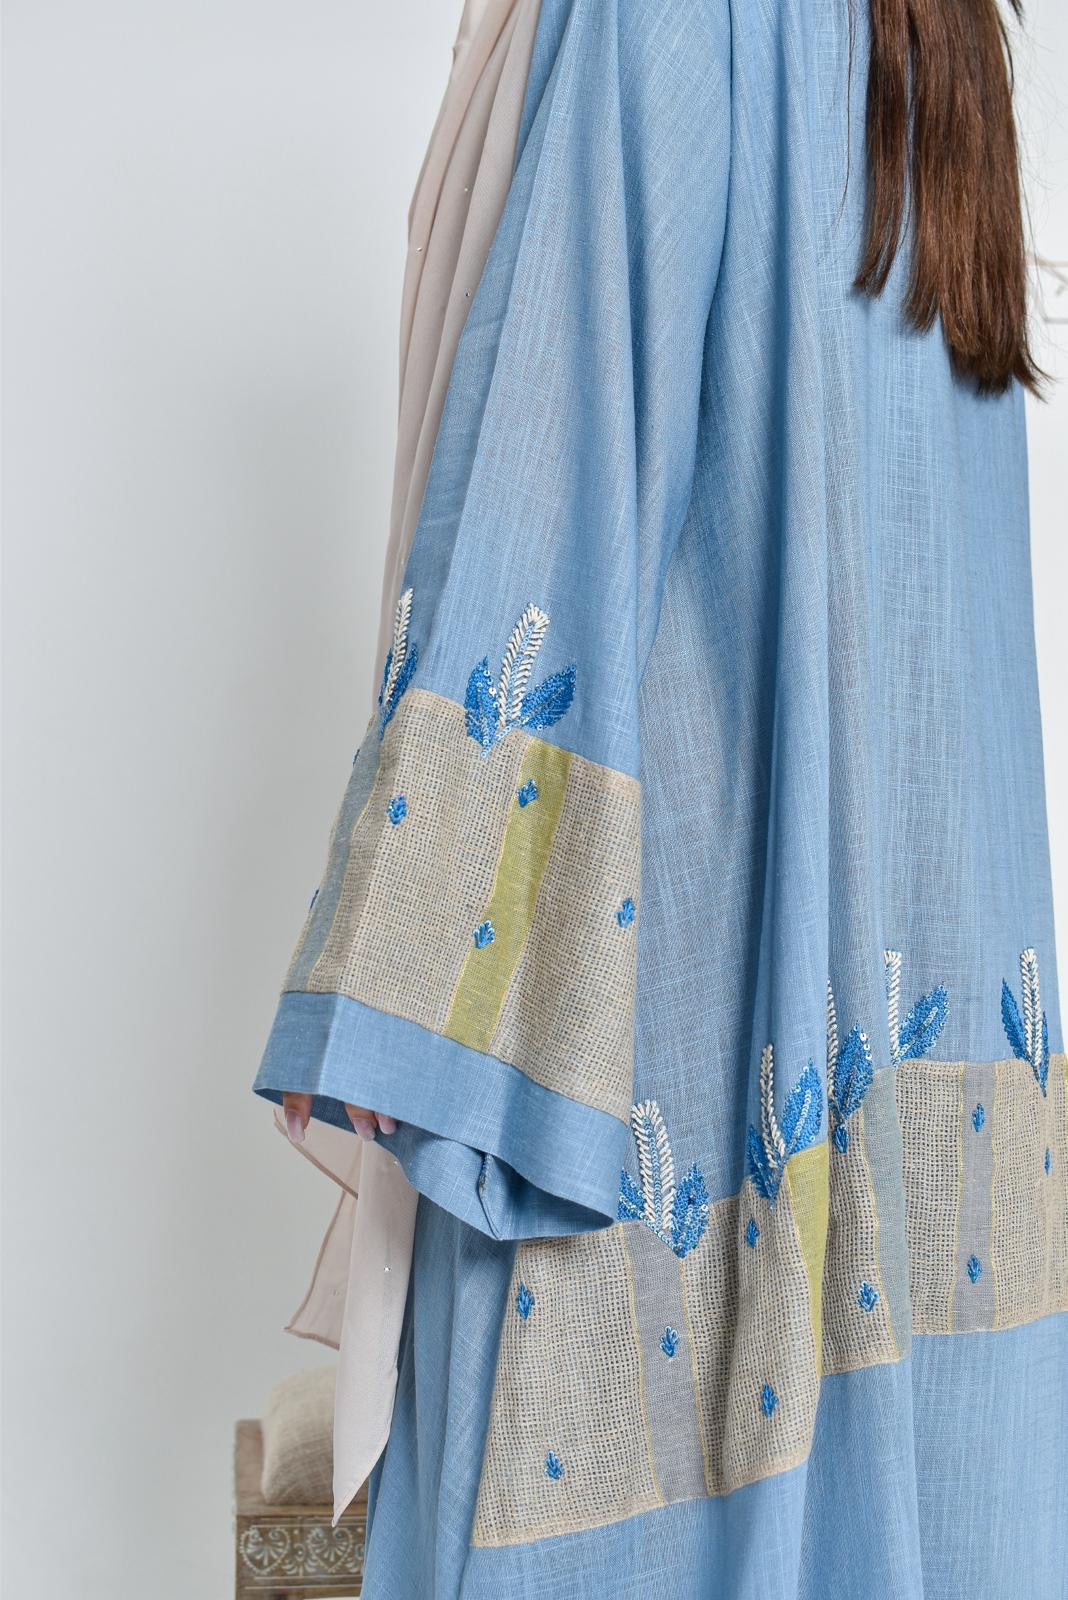 Sky blue linen fabric abaya, embroidered with appliqué art